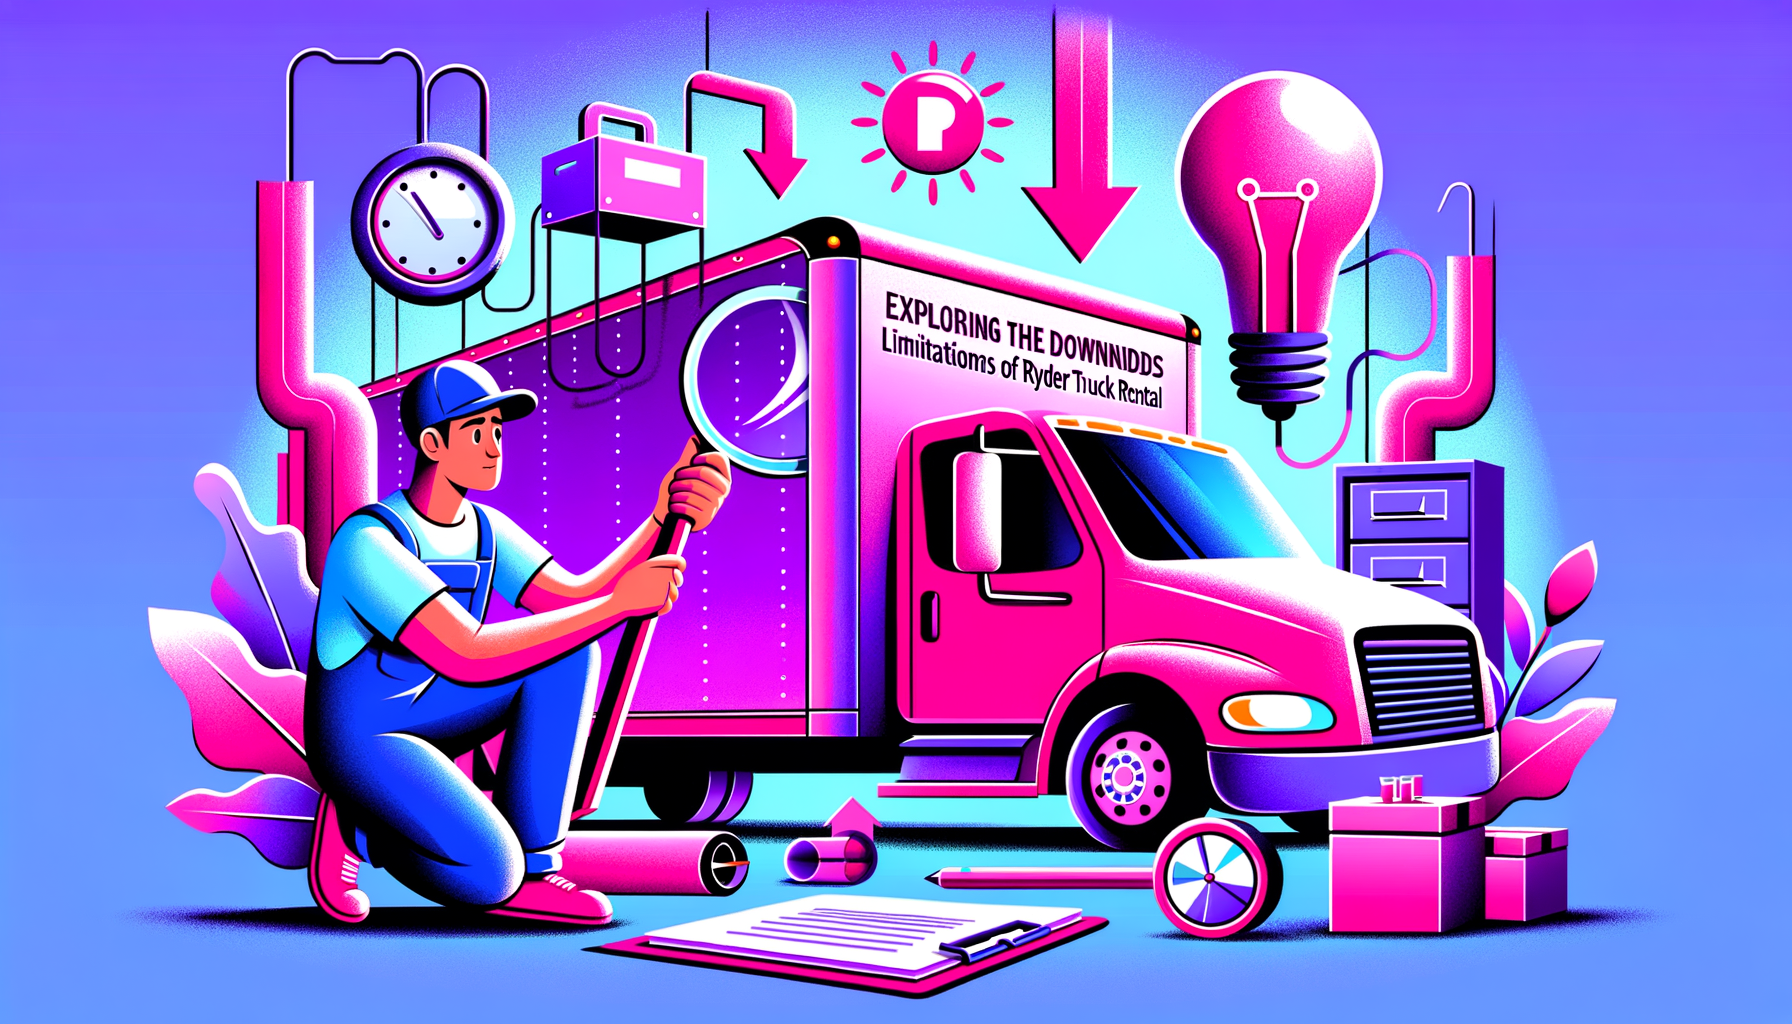 Fuschia cartoon illustration highlighting the limitations of Ryder Truck Rental, featuring a perplexed customer and a Ryder truck with visible cons.